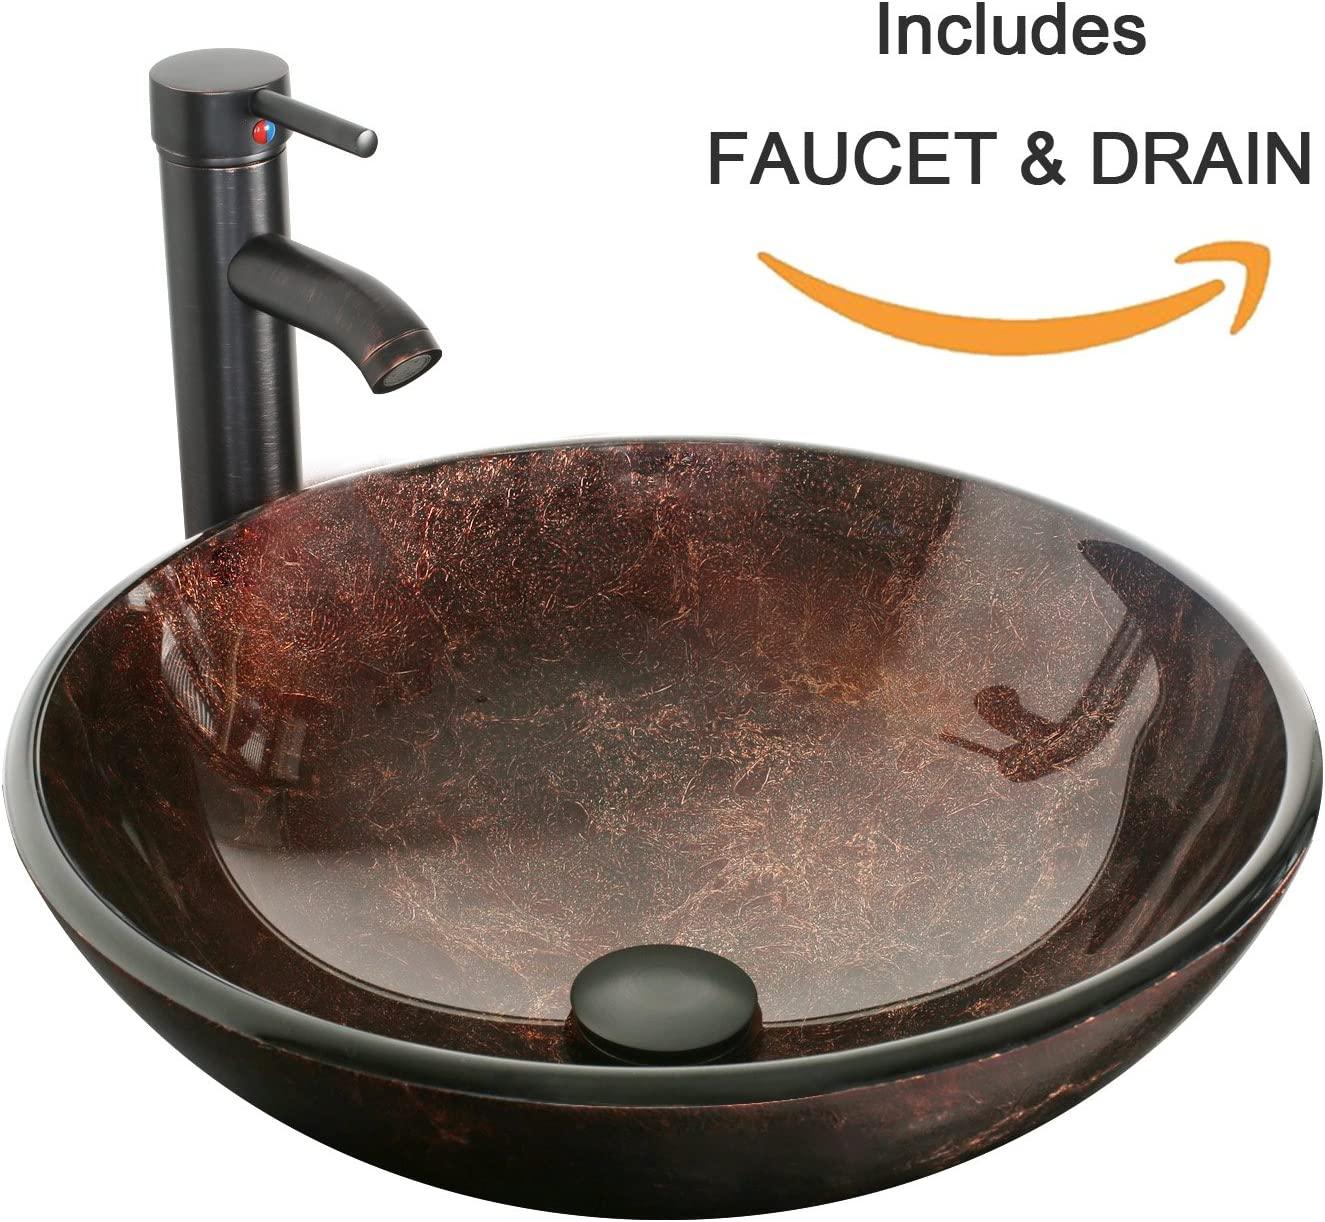 14" Bathroom Vanity and Sink Combo Black Small Vanity Sink & 1.5 GPM Water Save Faucet & Solid Brass Pop Up Drain